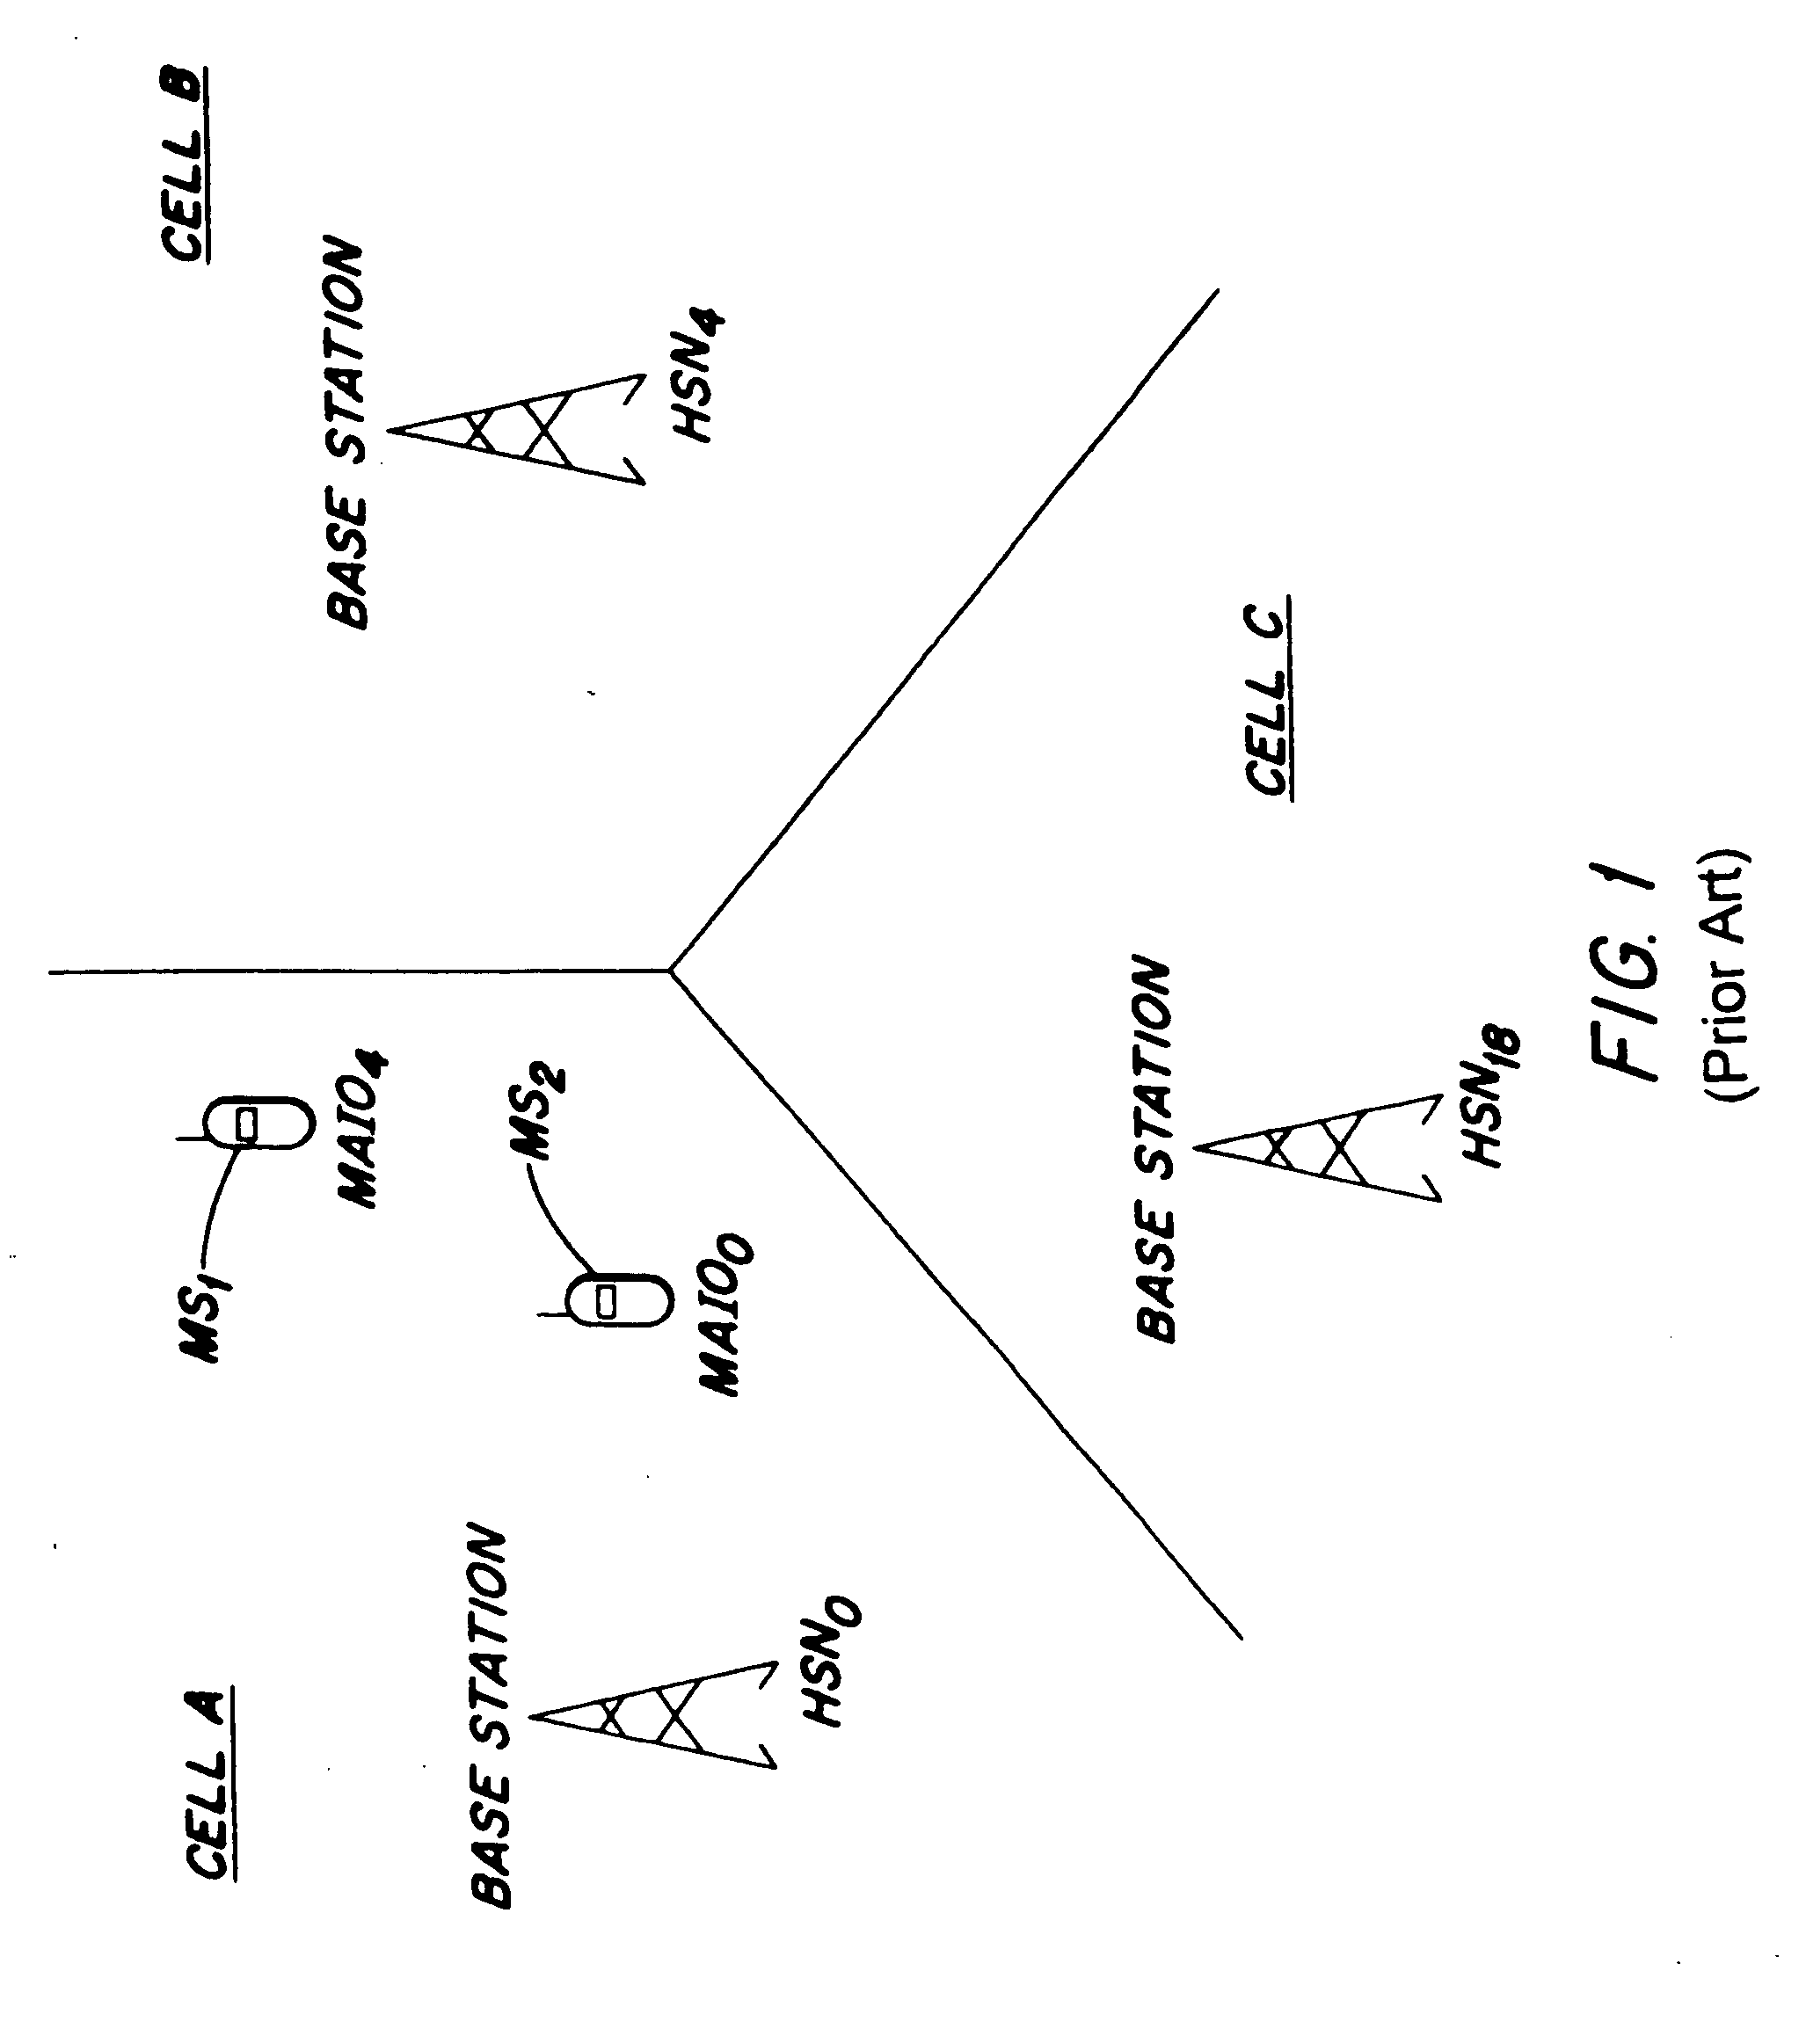 Frequency hopping sequence allocation